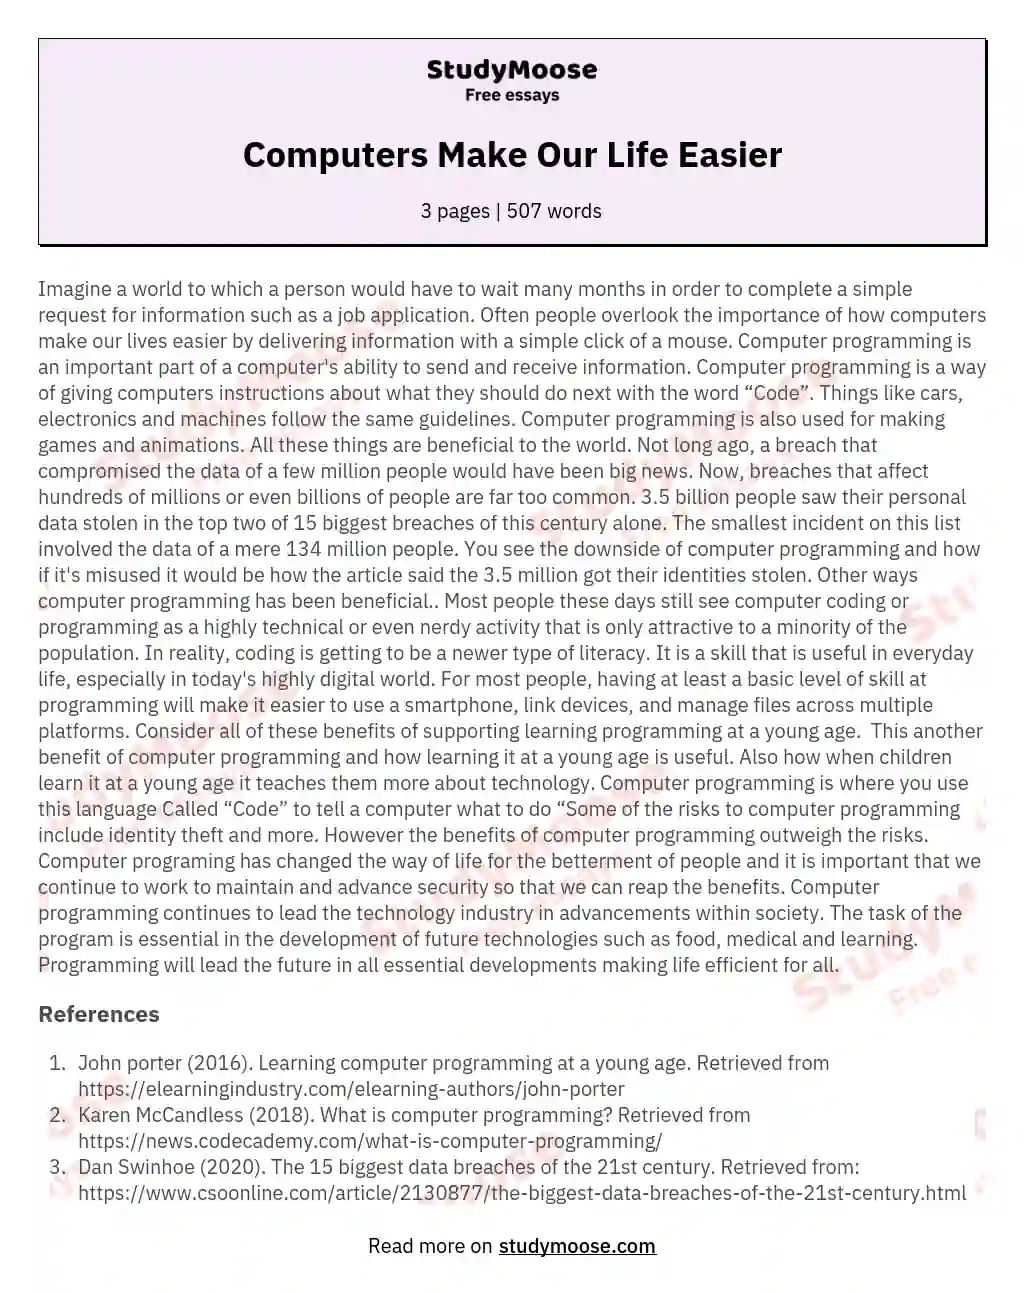 Computers Make Our Life Easier essay